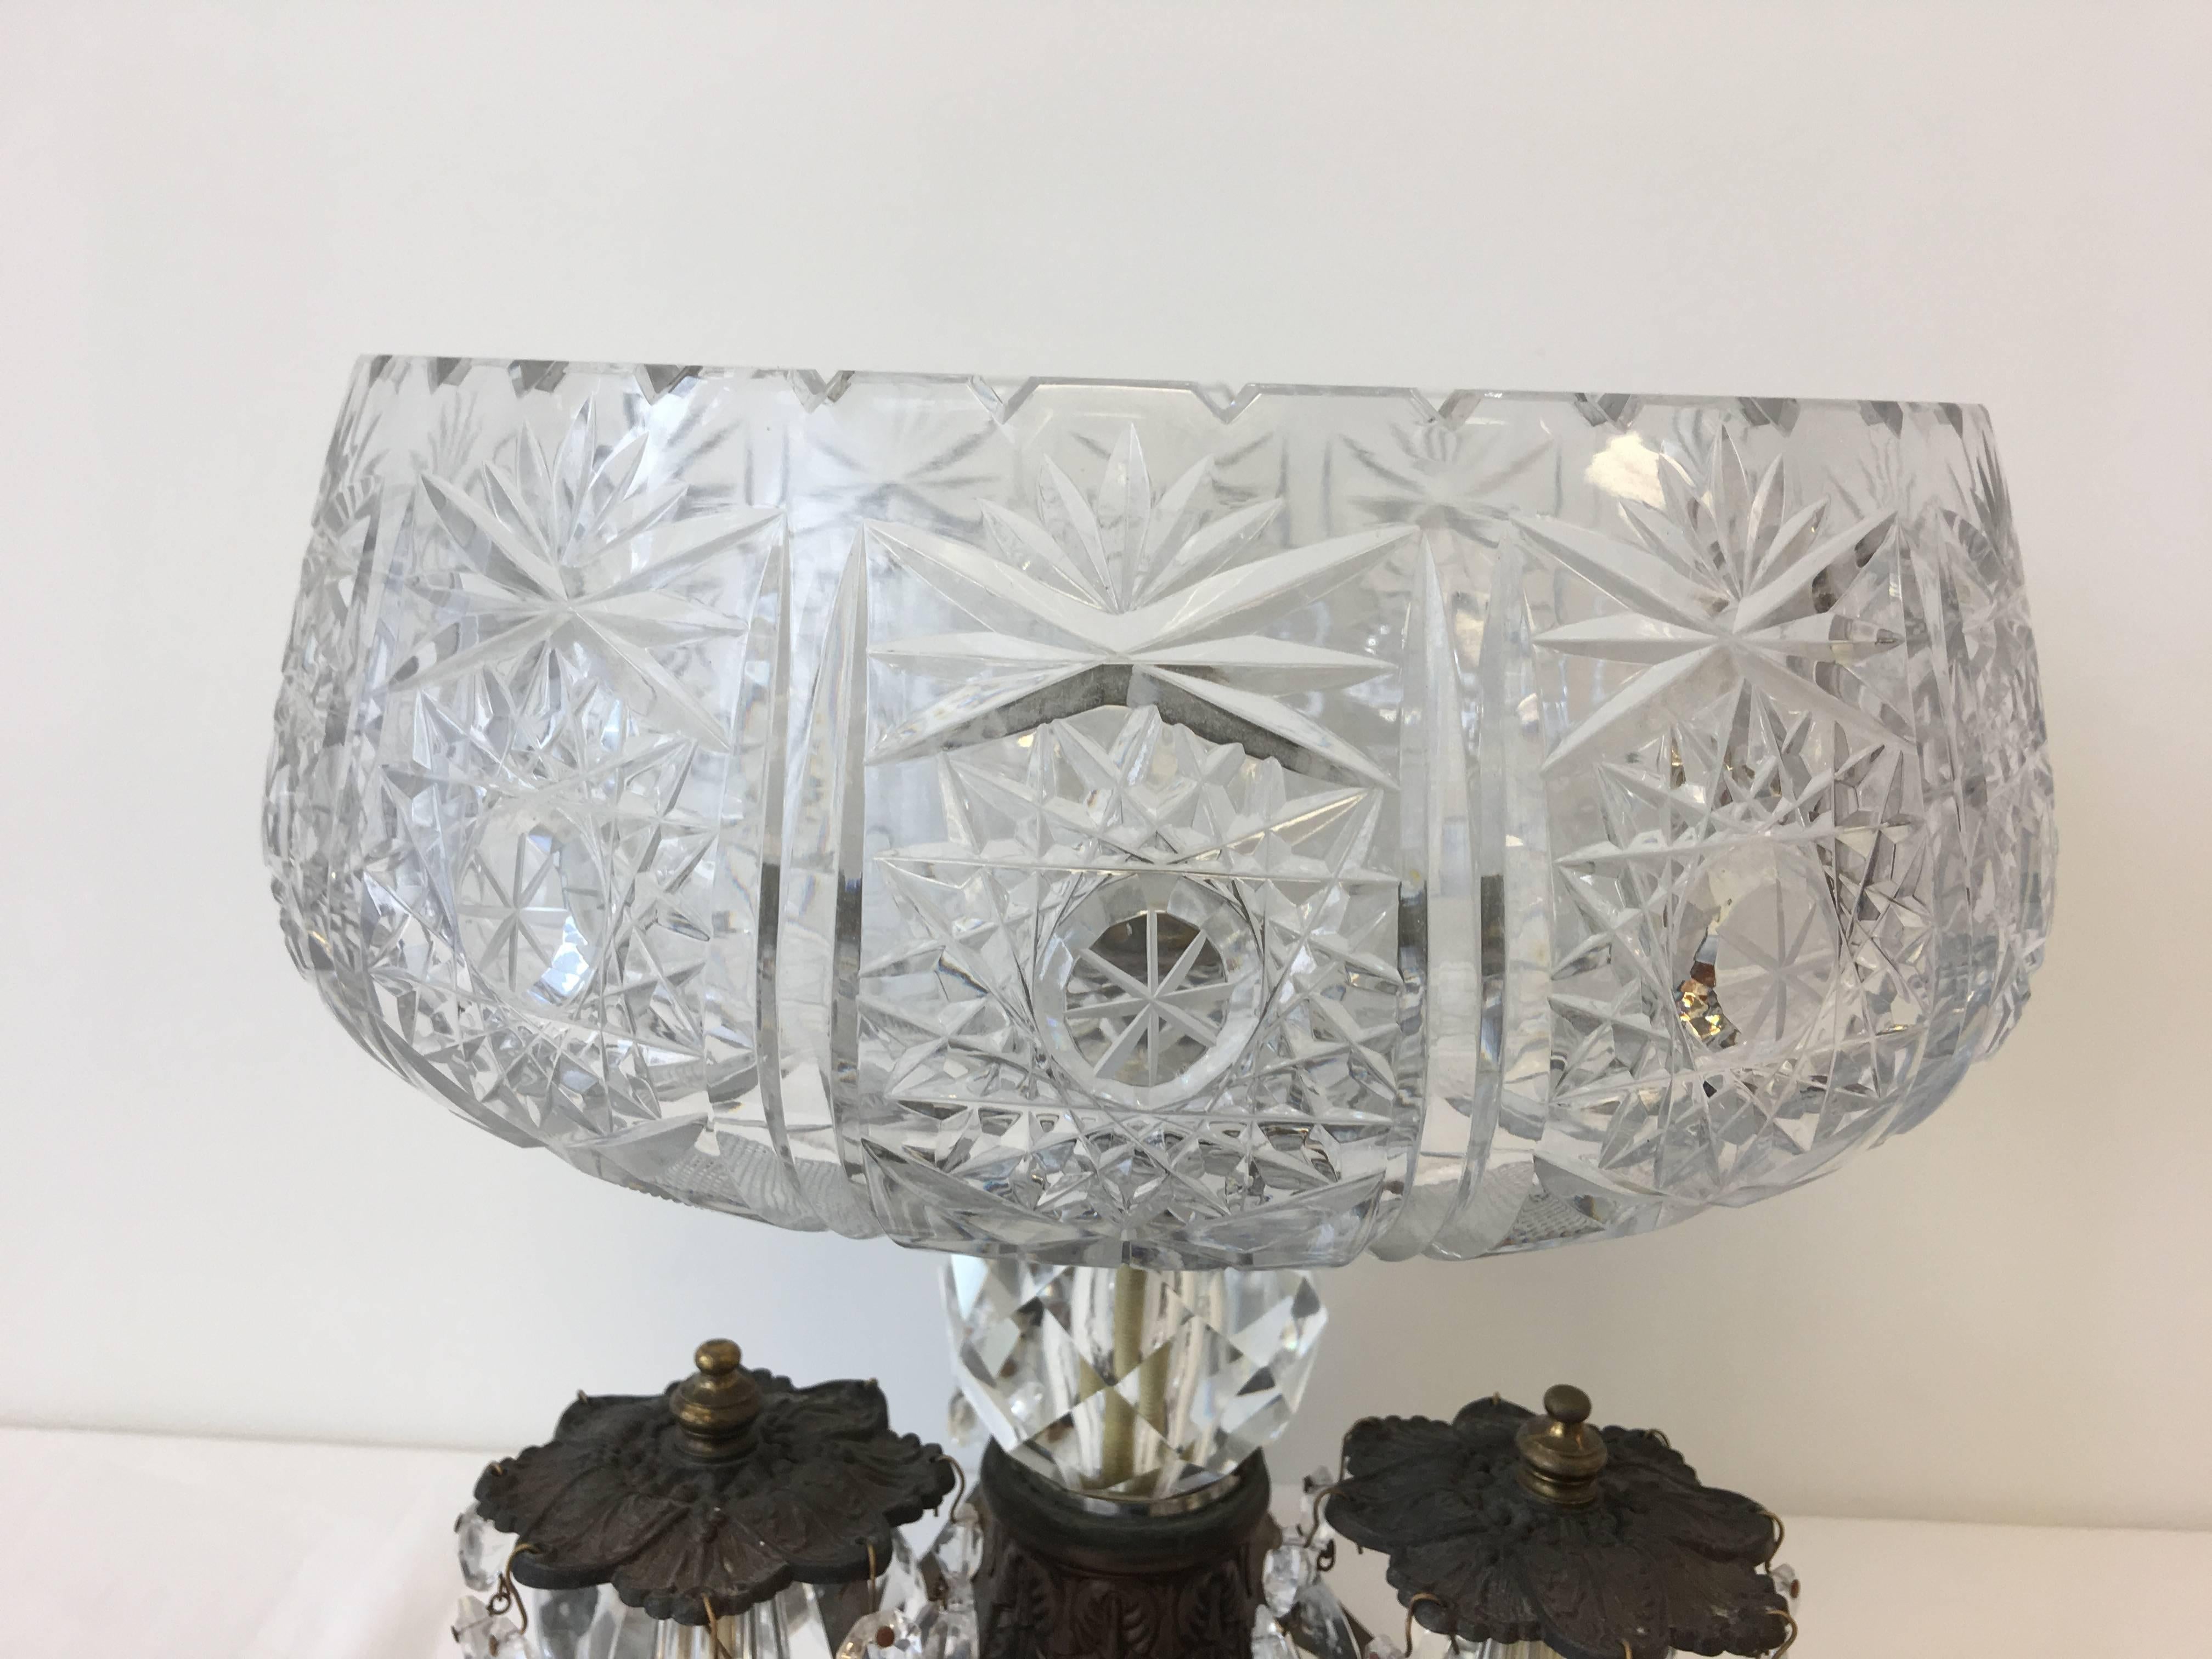 Offered is an exquisite, 19th century Art Nouveau, substantially large crystal and bronze compote bowl. A magnificent piece for a centerpiece, floral arrangement, etc. Incredibly heavy.